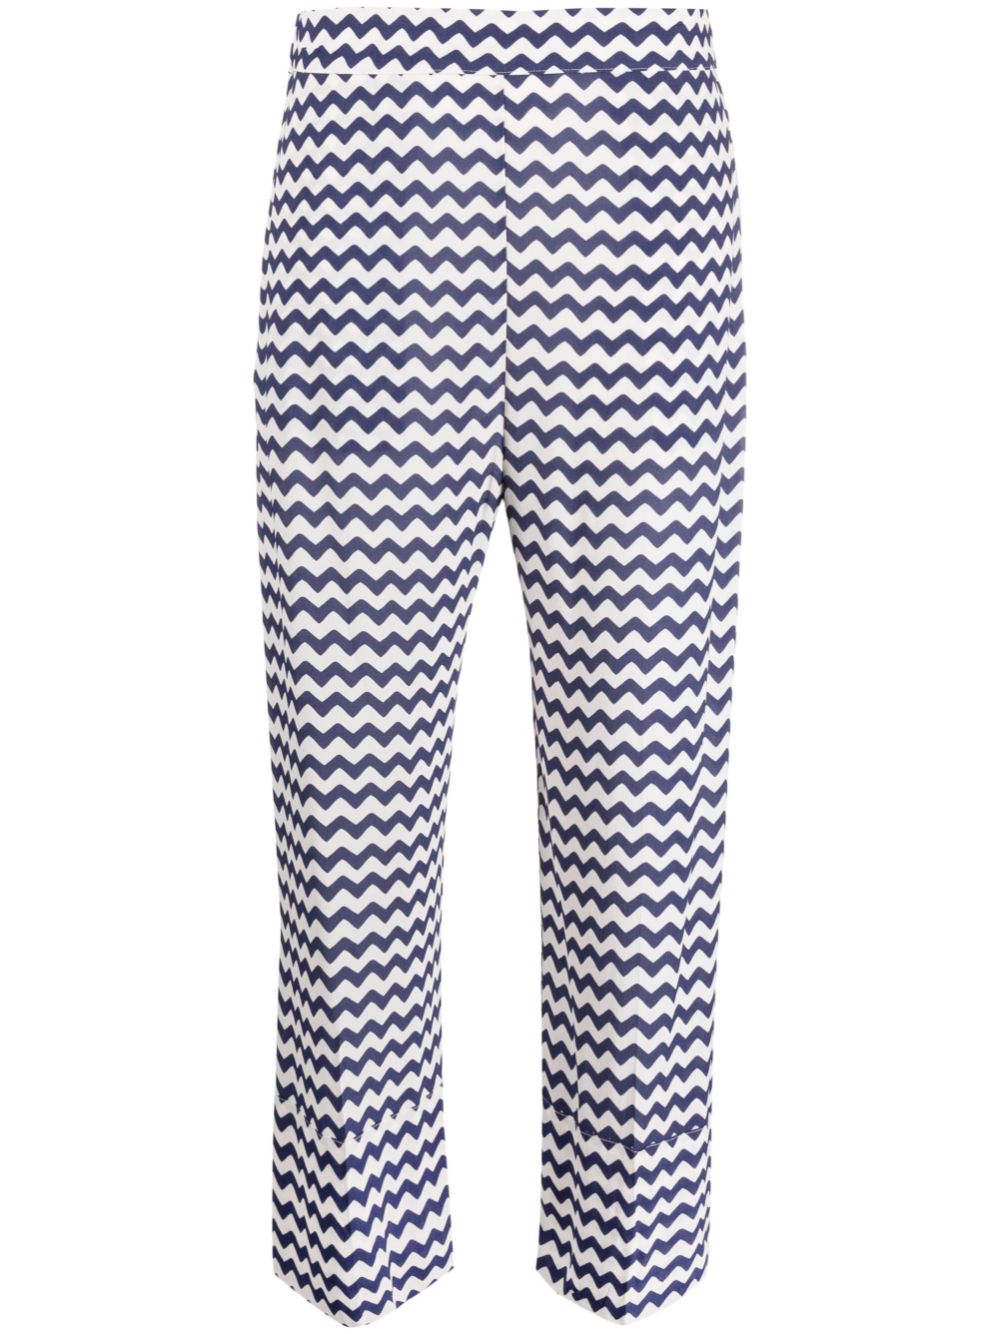 Zigzag-print cropped trousers